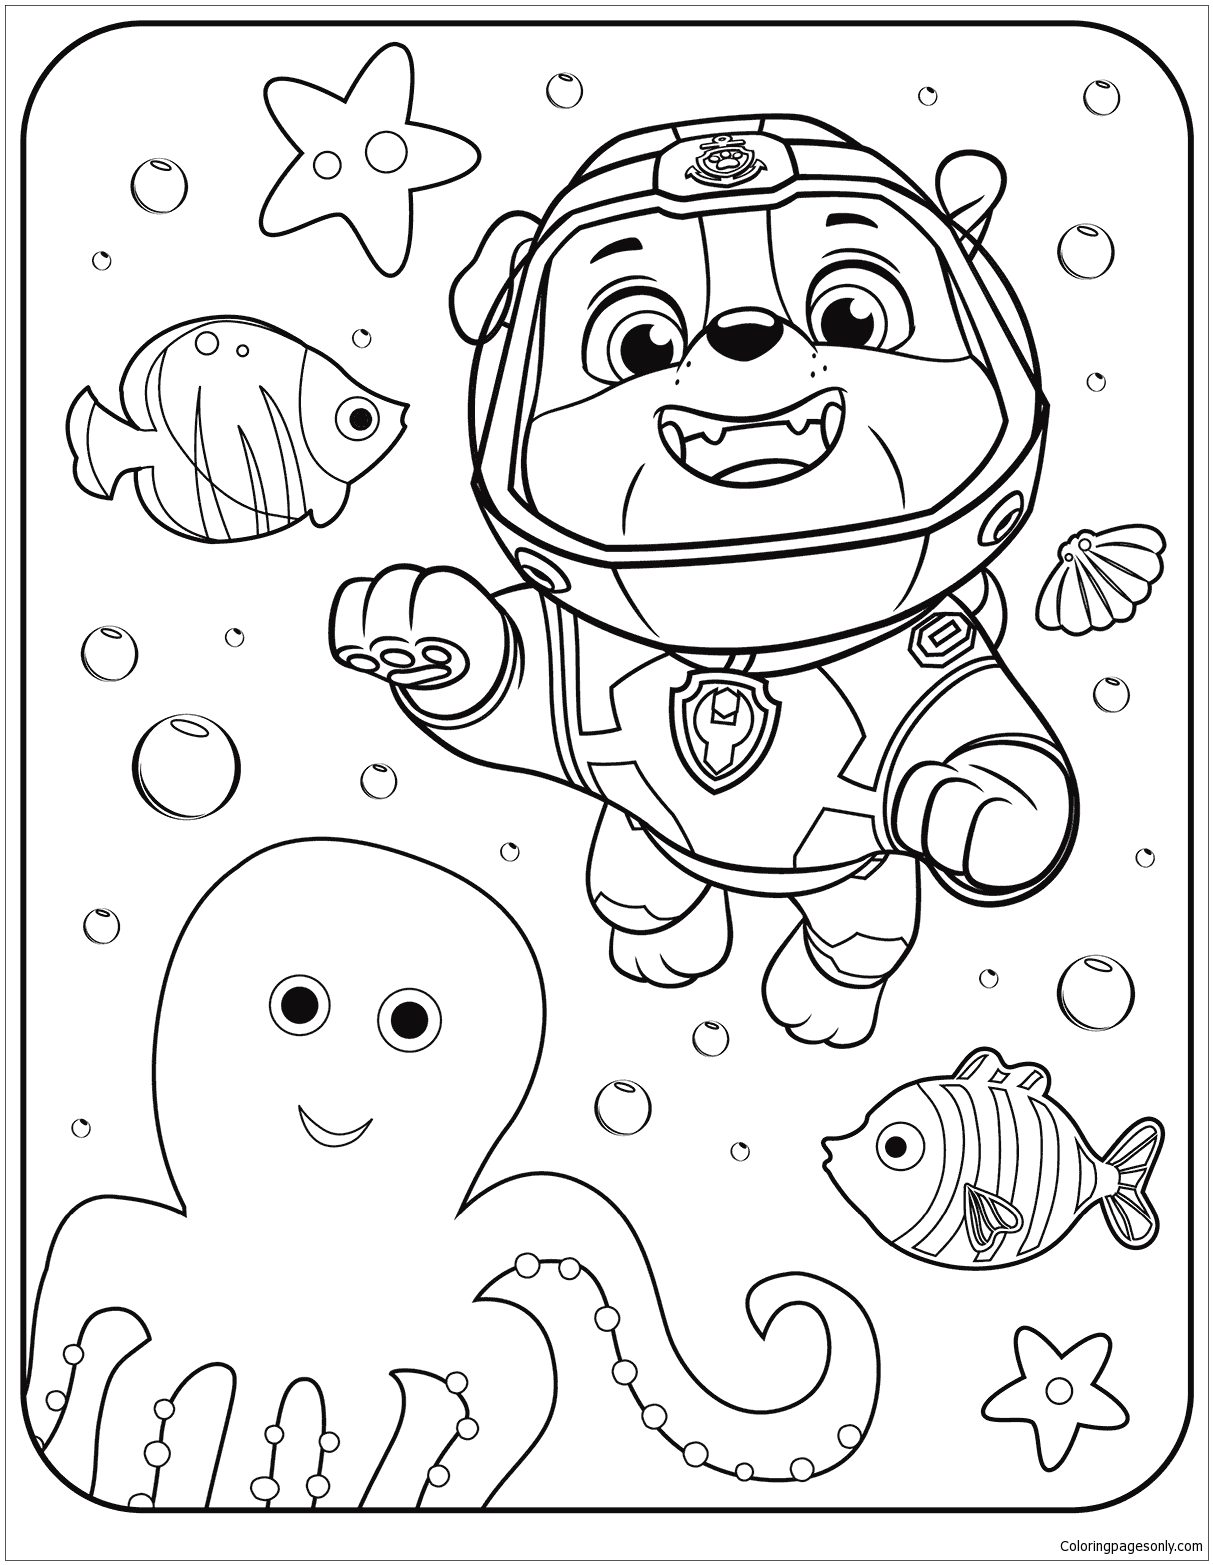 Startling Paw Patrol Coloring Pages